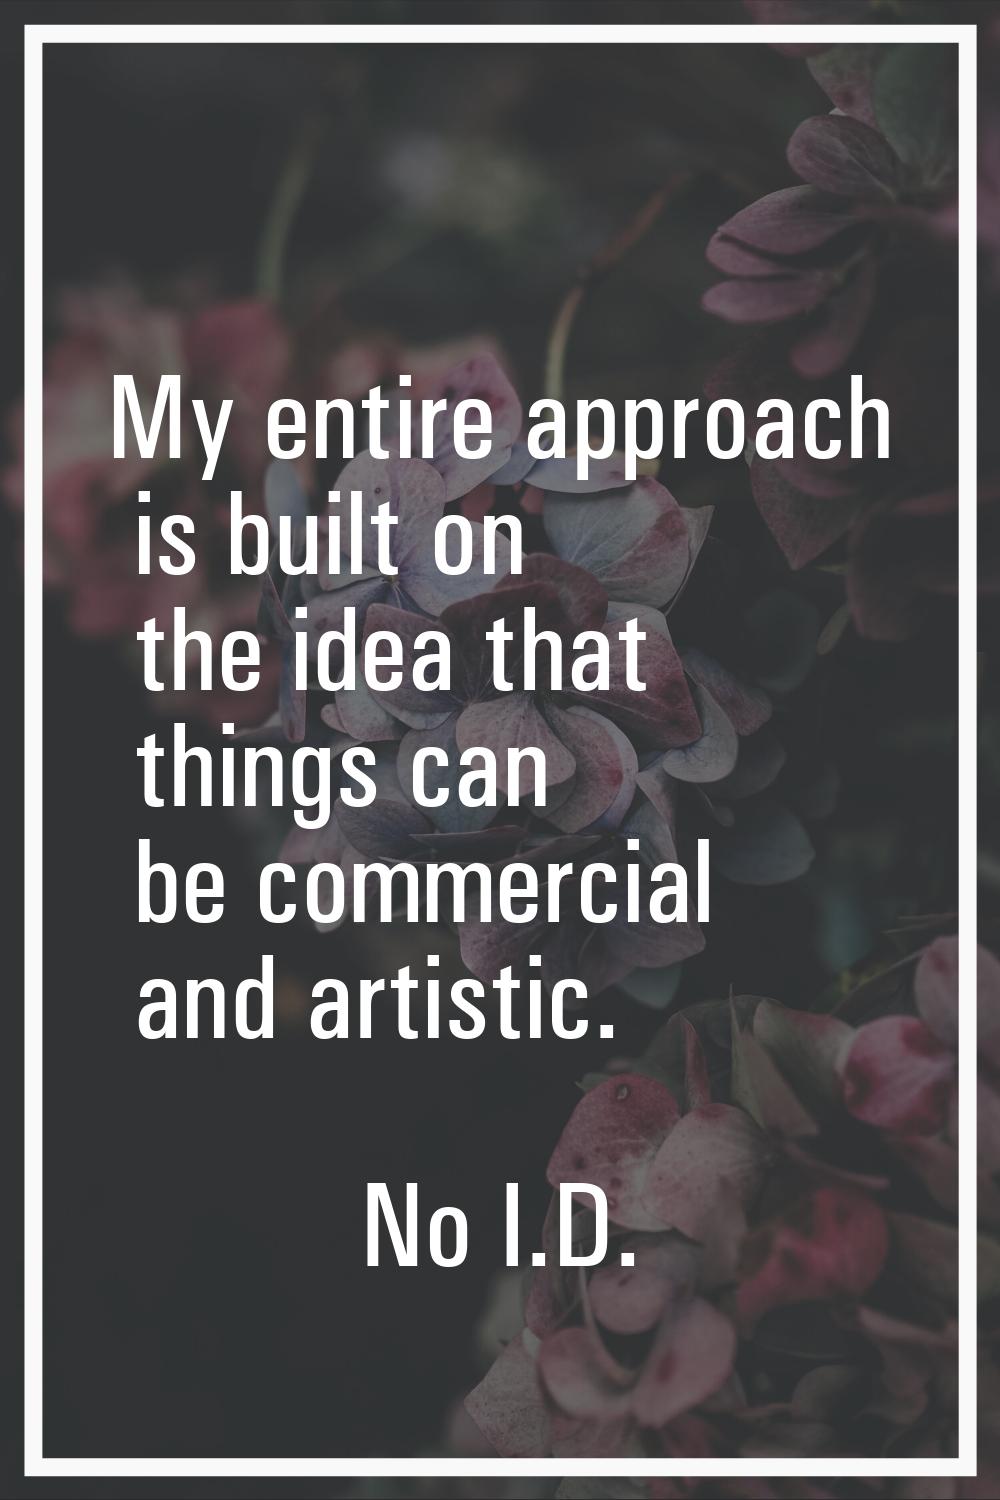 My entire approach is built on the idea that things can be commercial and artistic.